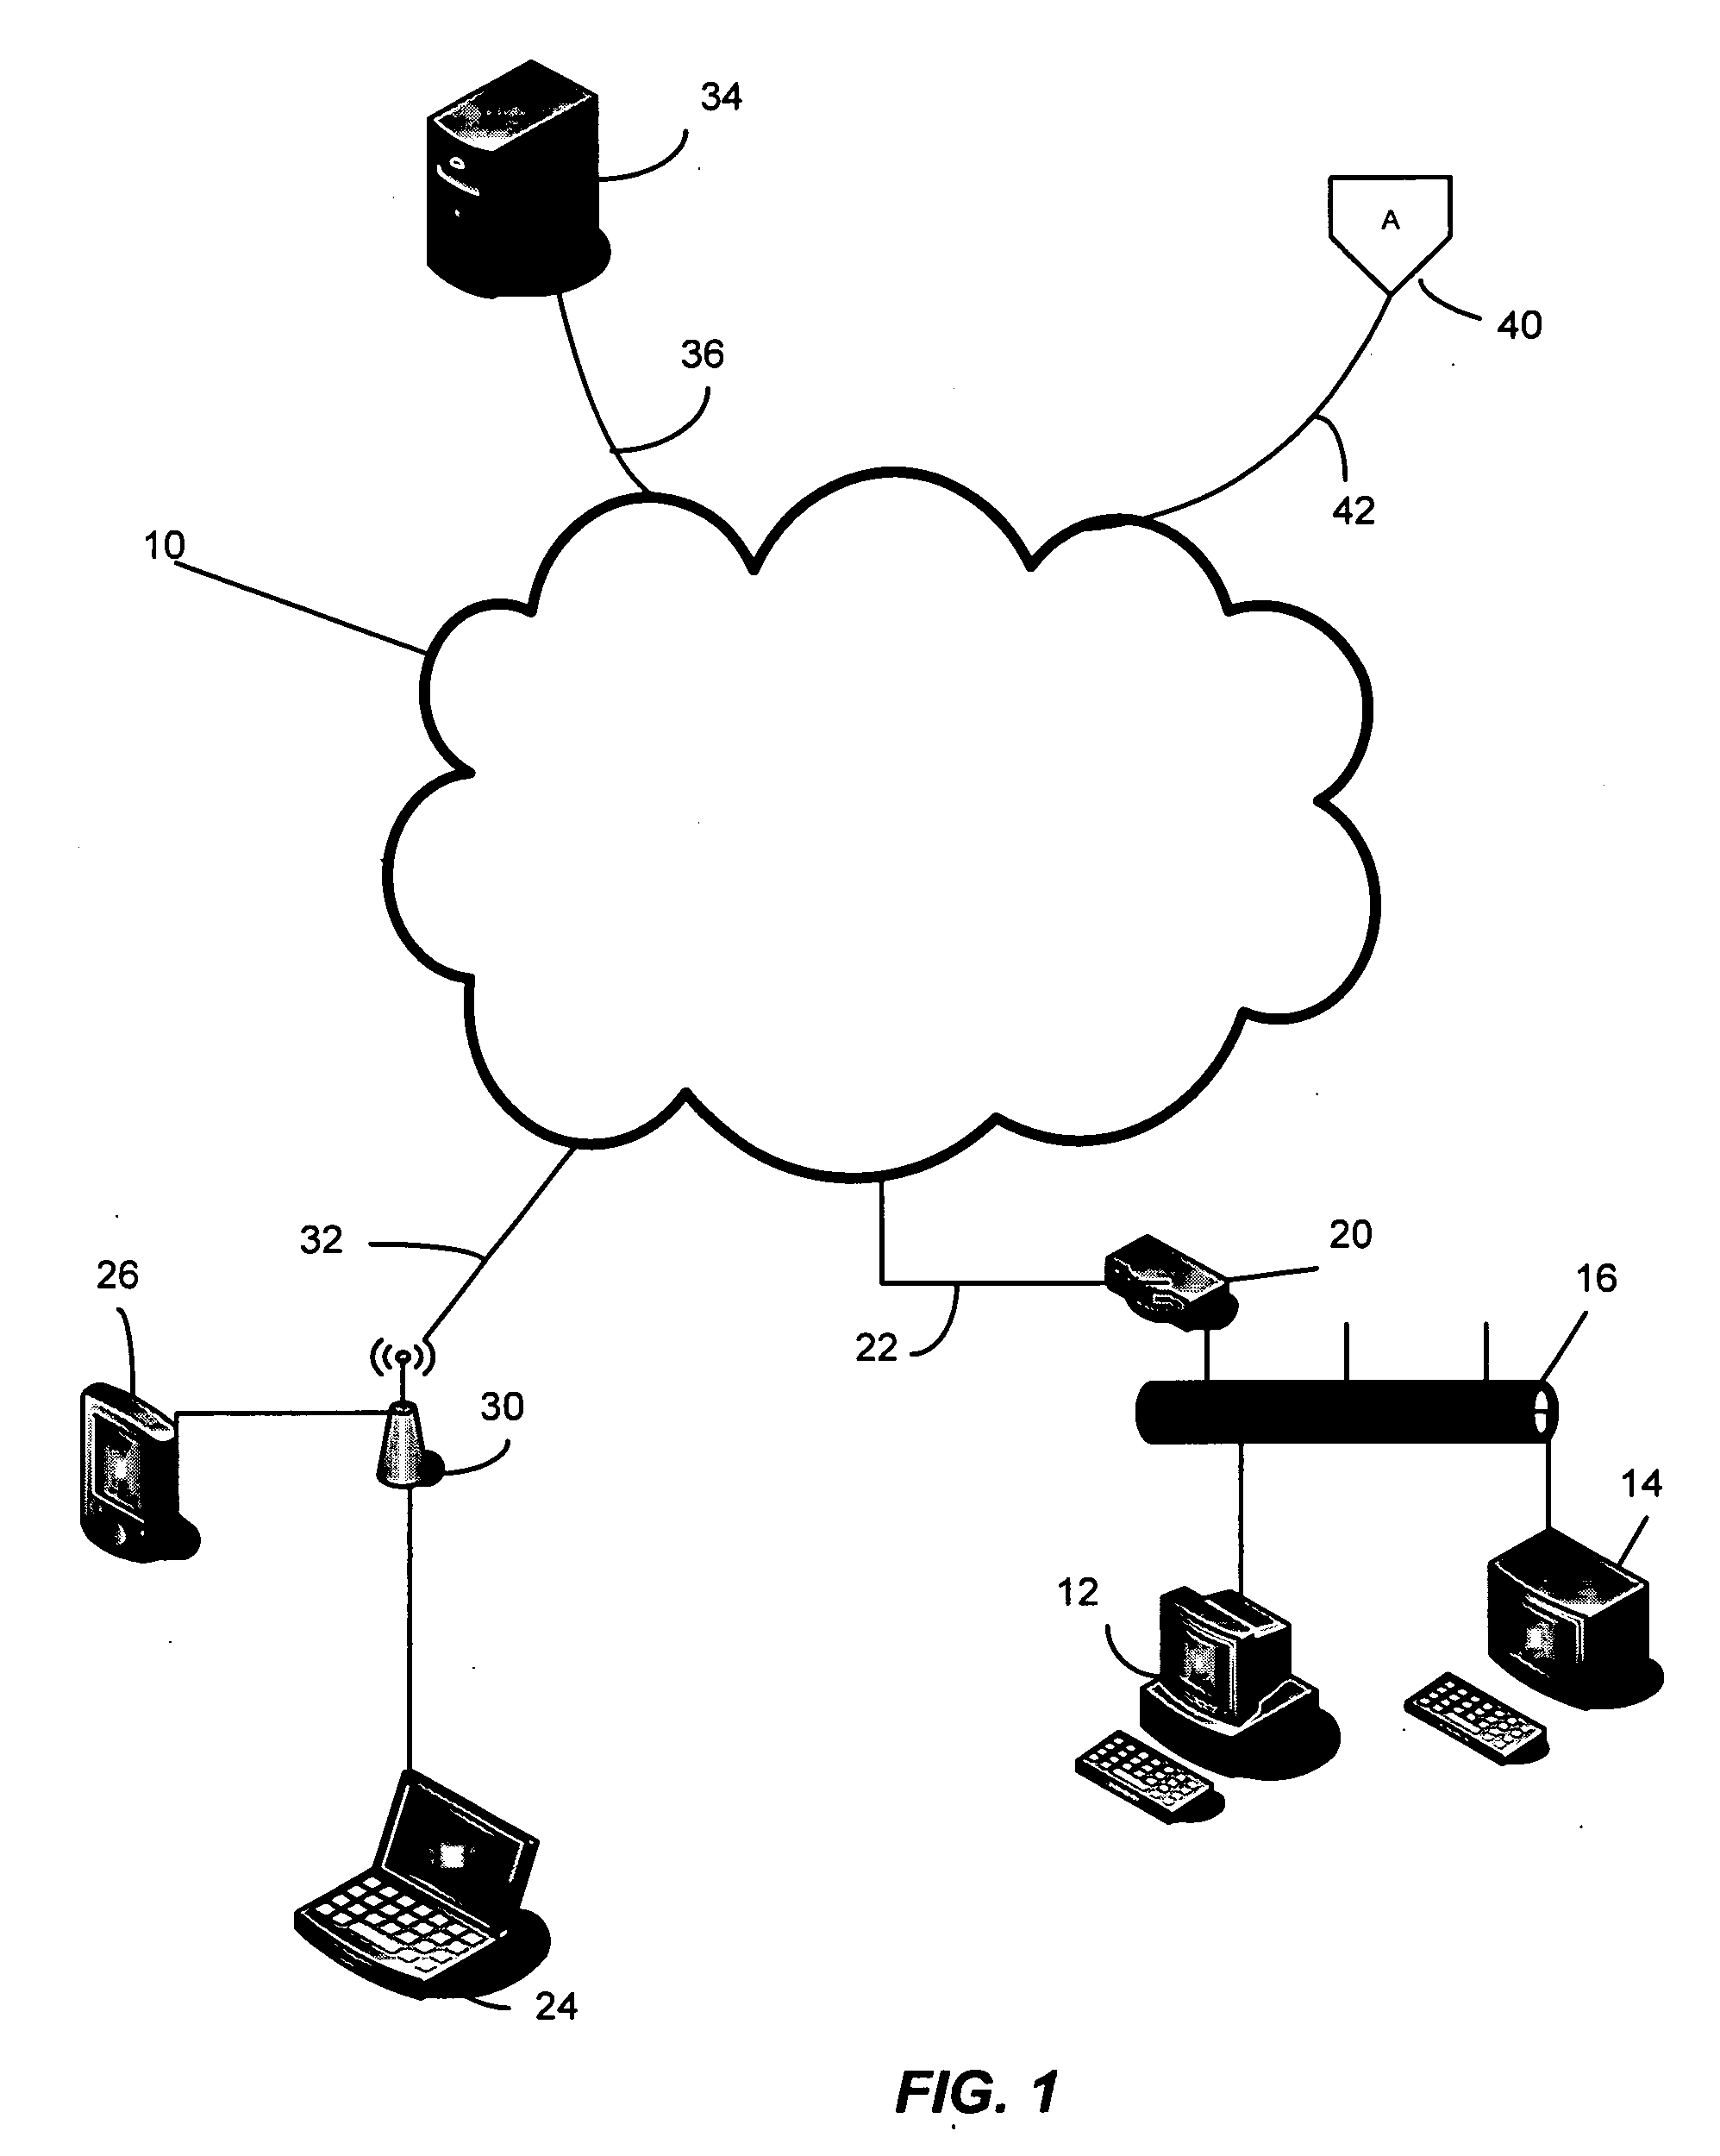 System and Method for Electronic Feedback for Transaction Triggers